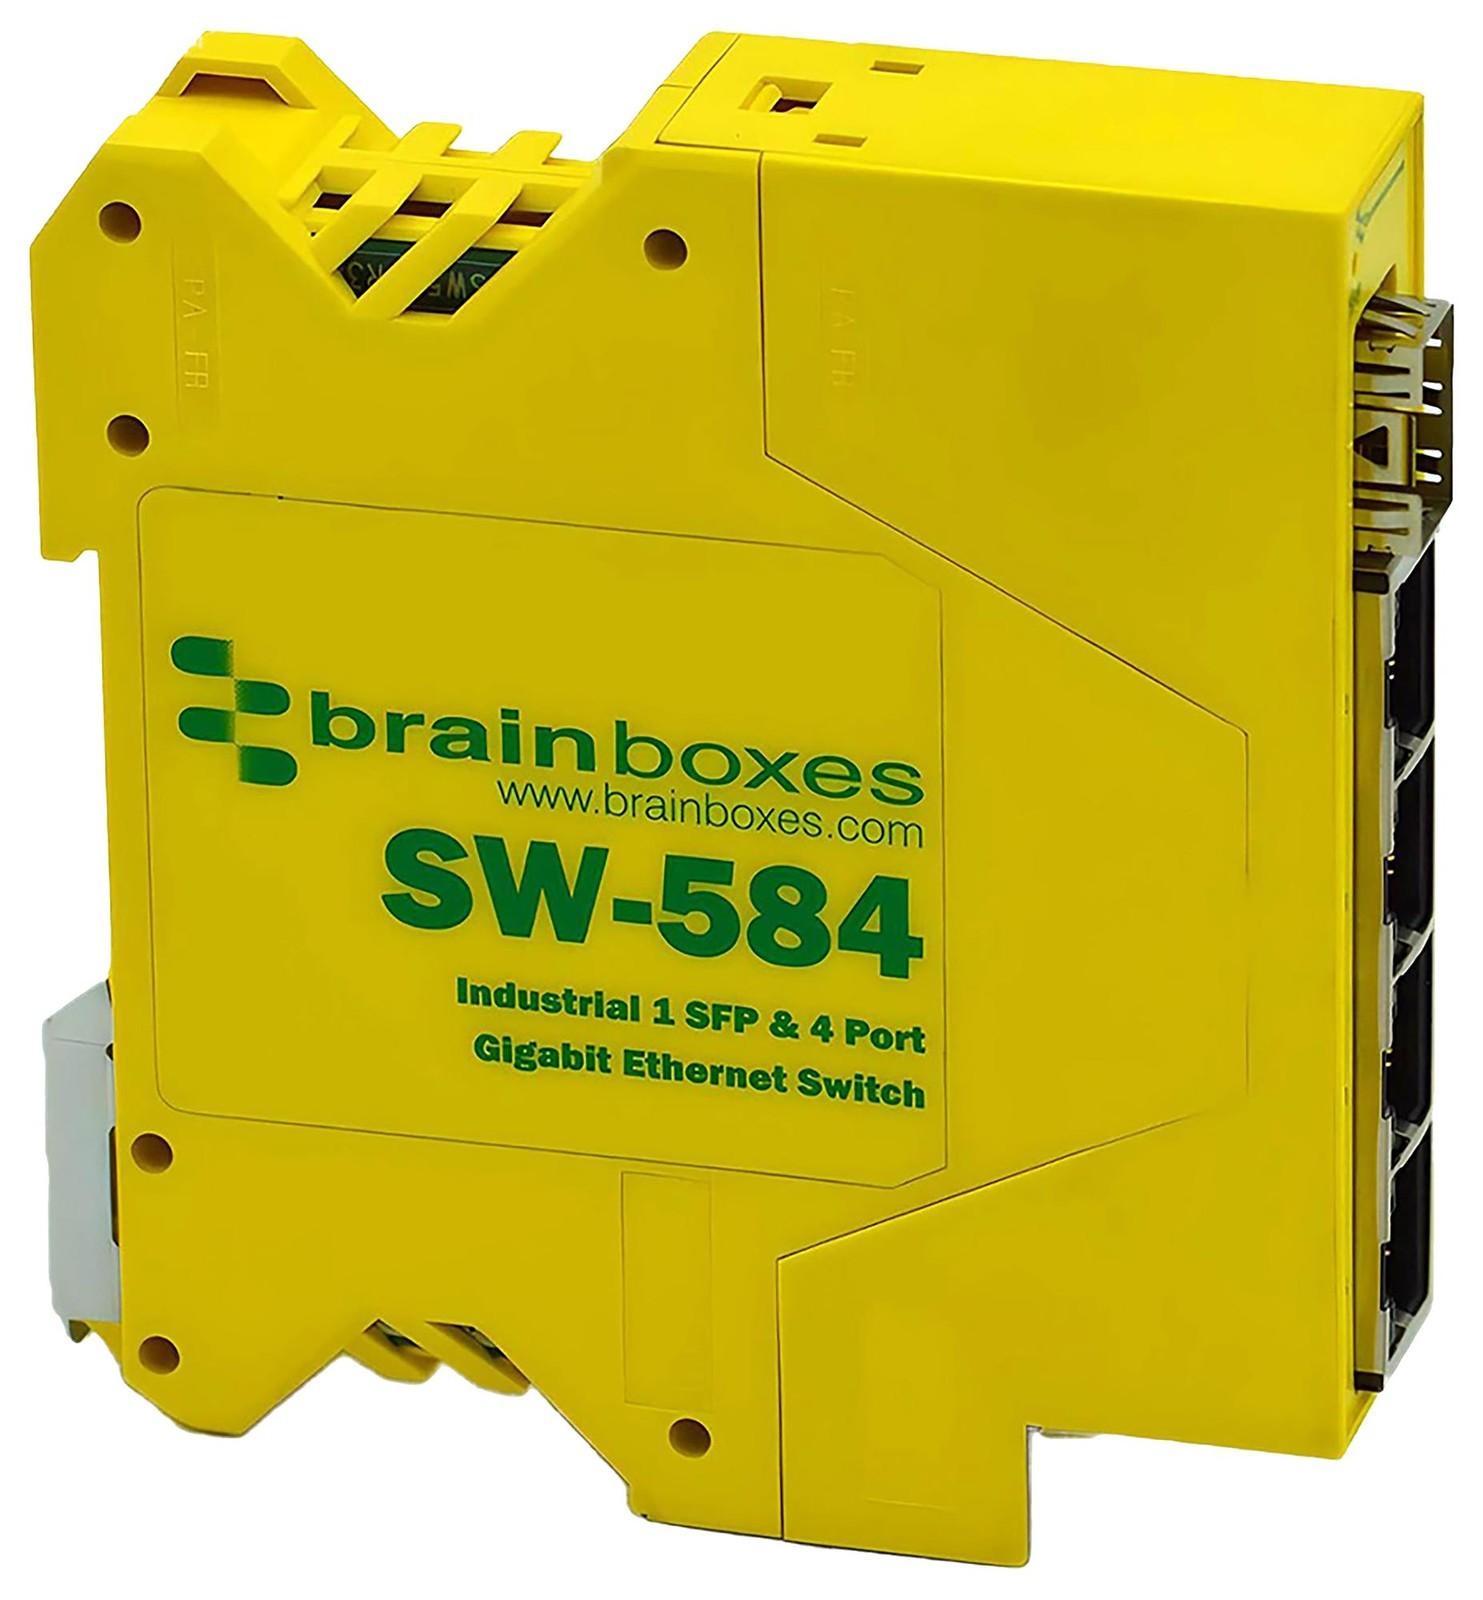 Brainboxes Sw-584 Ethernet Switch, 10Mbps, 100Mbps, 1Gbps